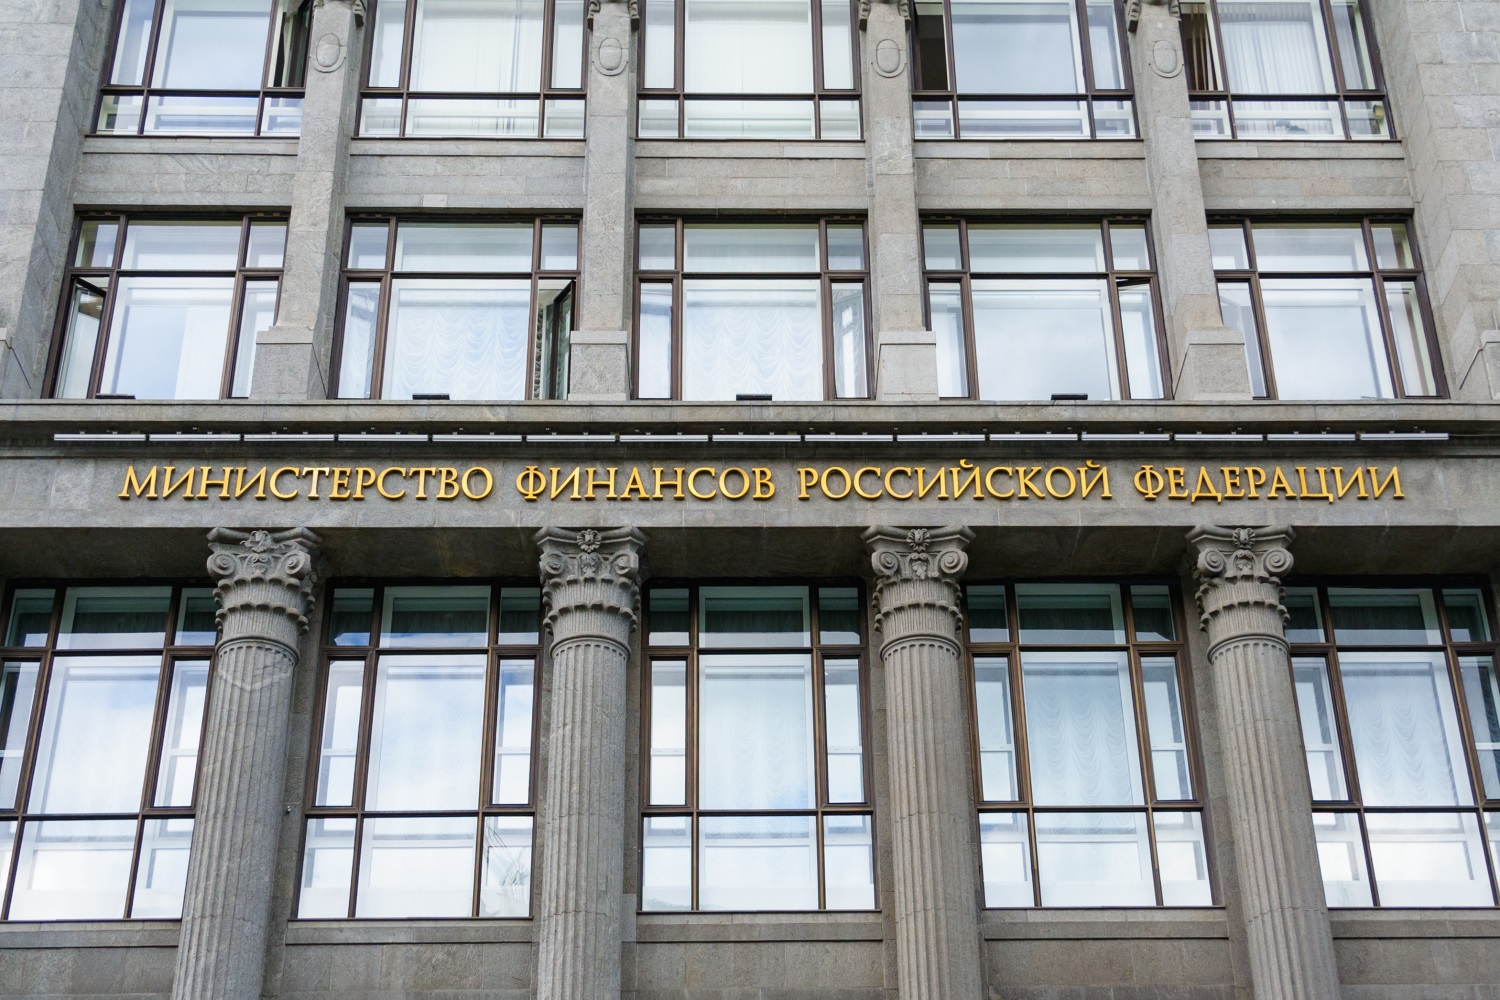 The facade of the headquarters of the Ministry of Finance of the Russian Federation, in Moscow, Russia.